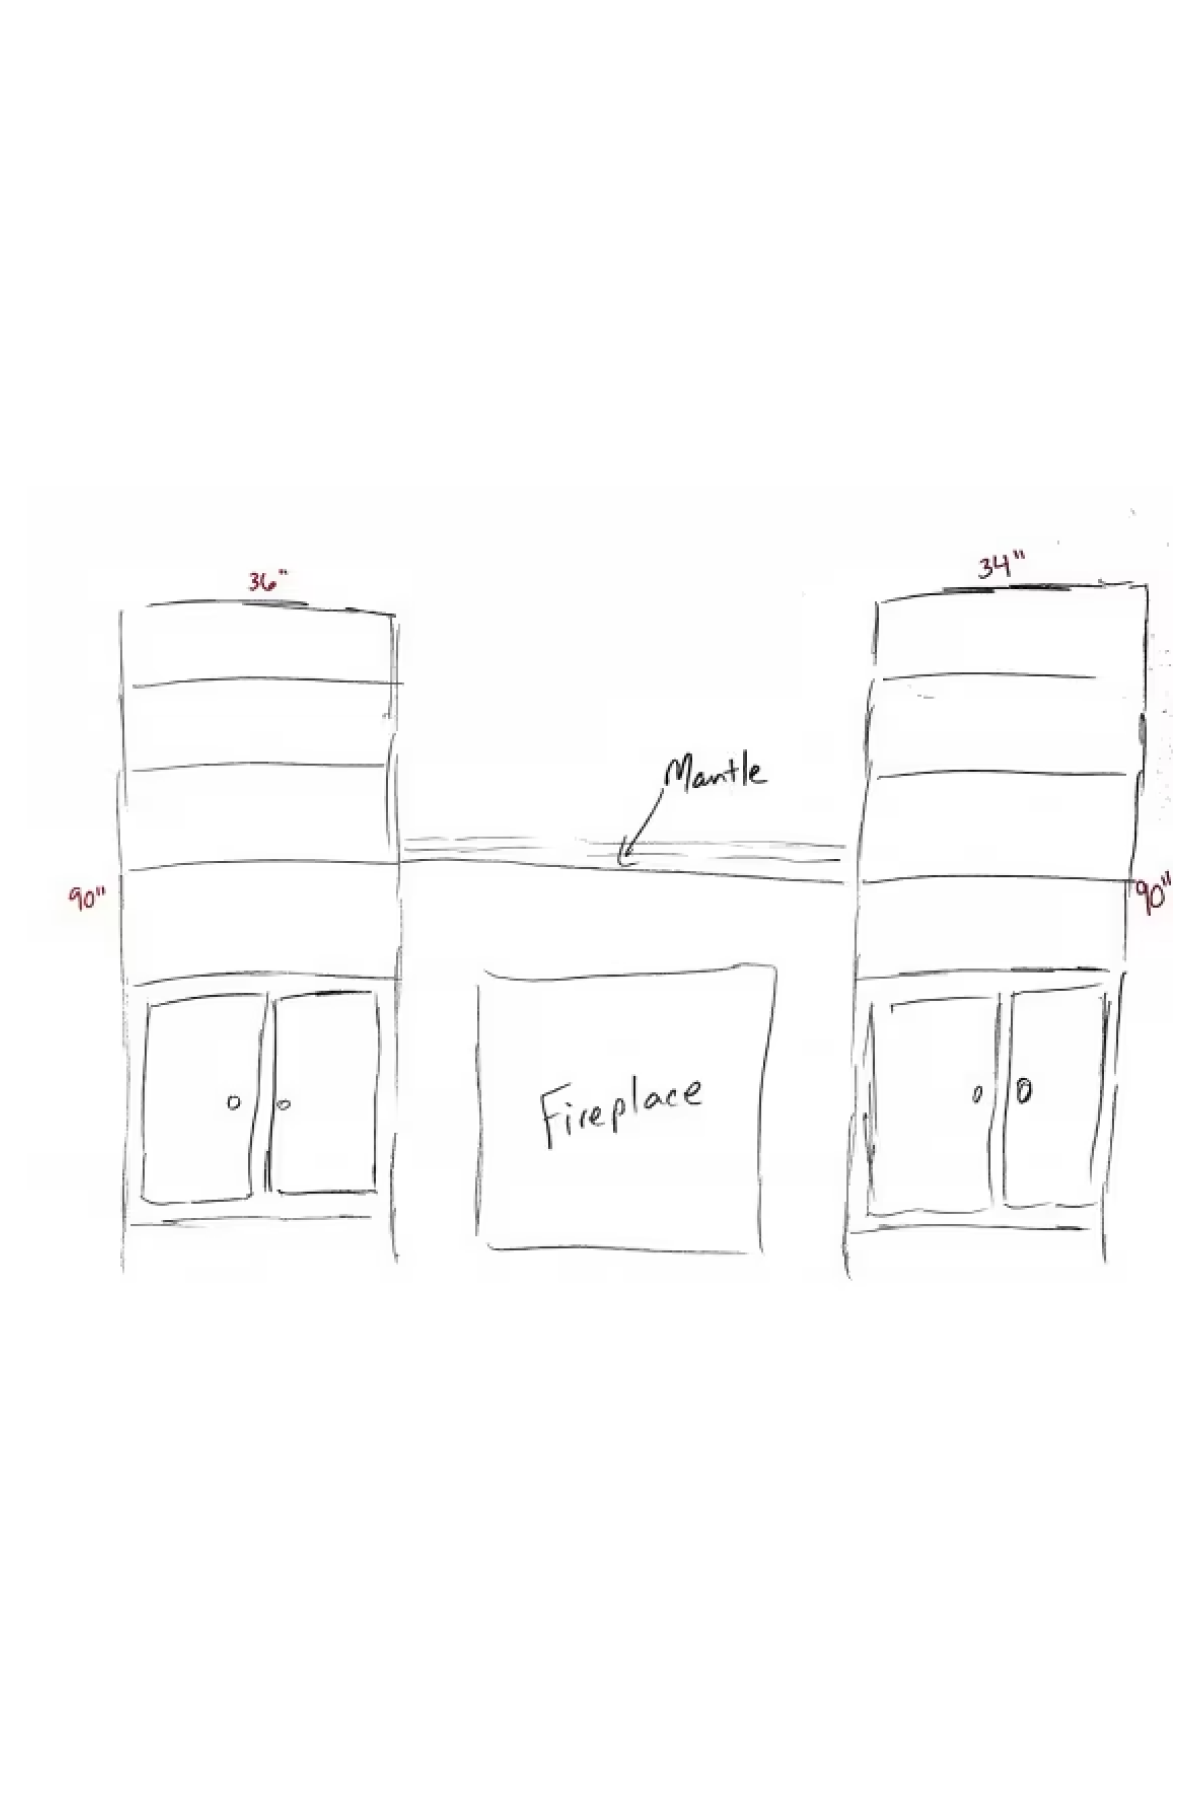 Hand drawn sketch of two bookcase hutches on either side of a fireplace.